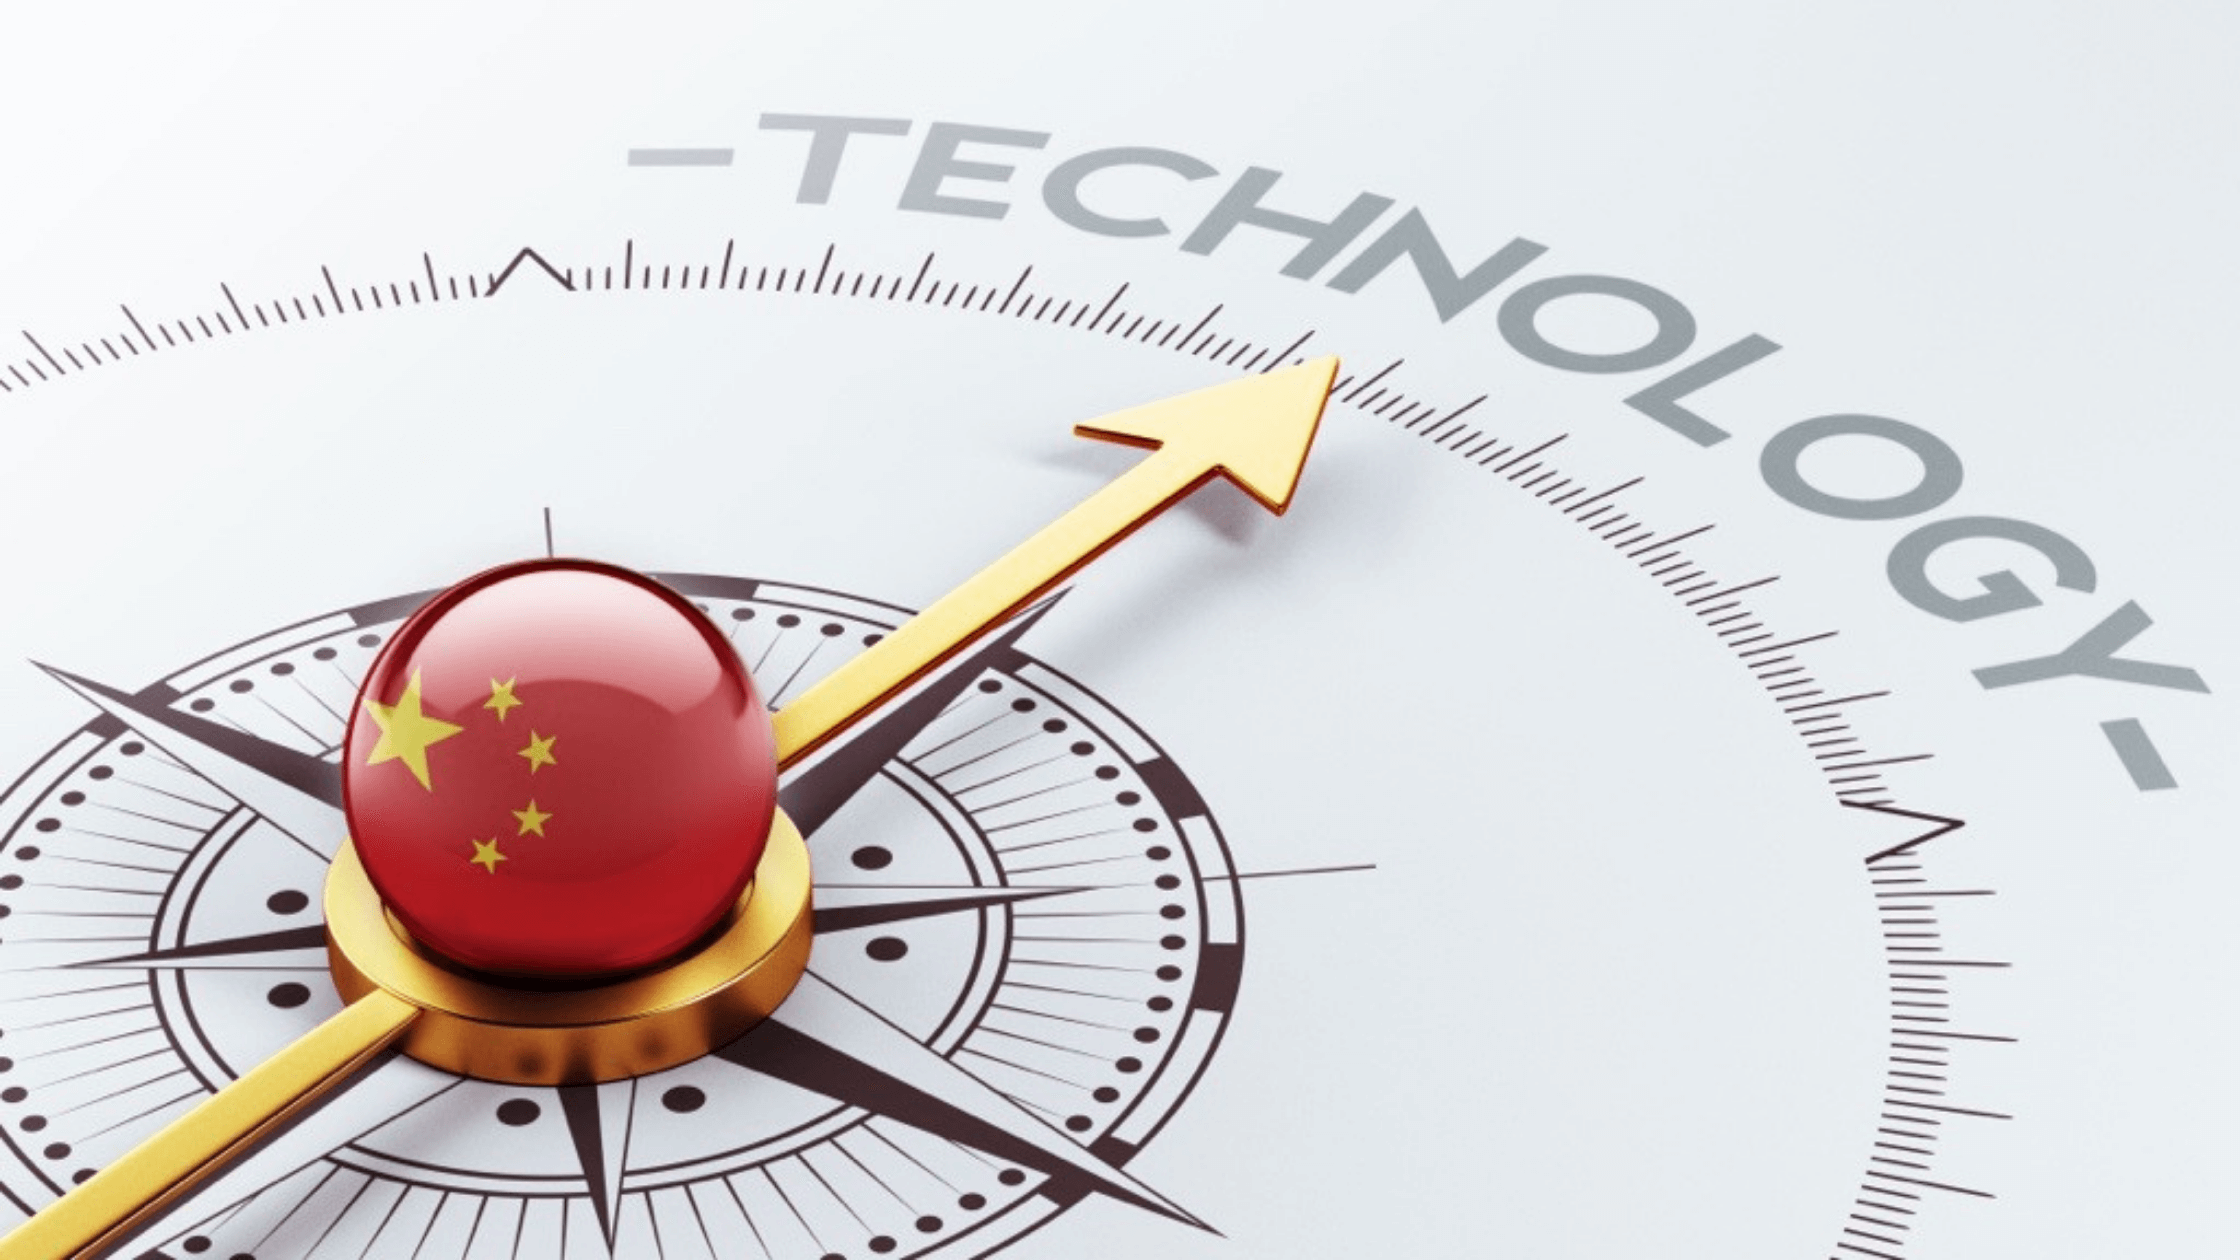 Hang Seng Tech Index: What You Need to Know Before Investing